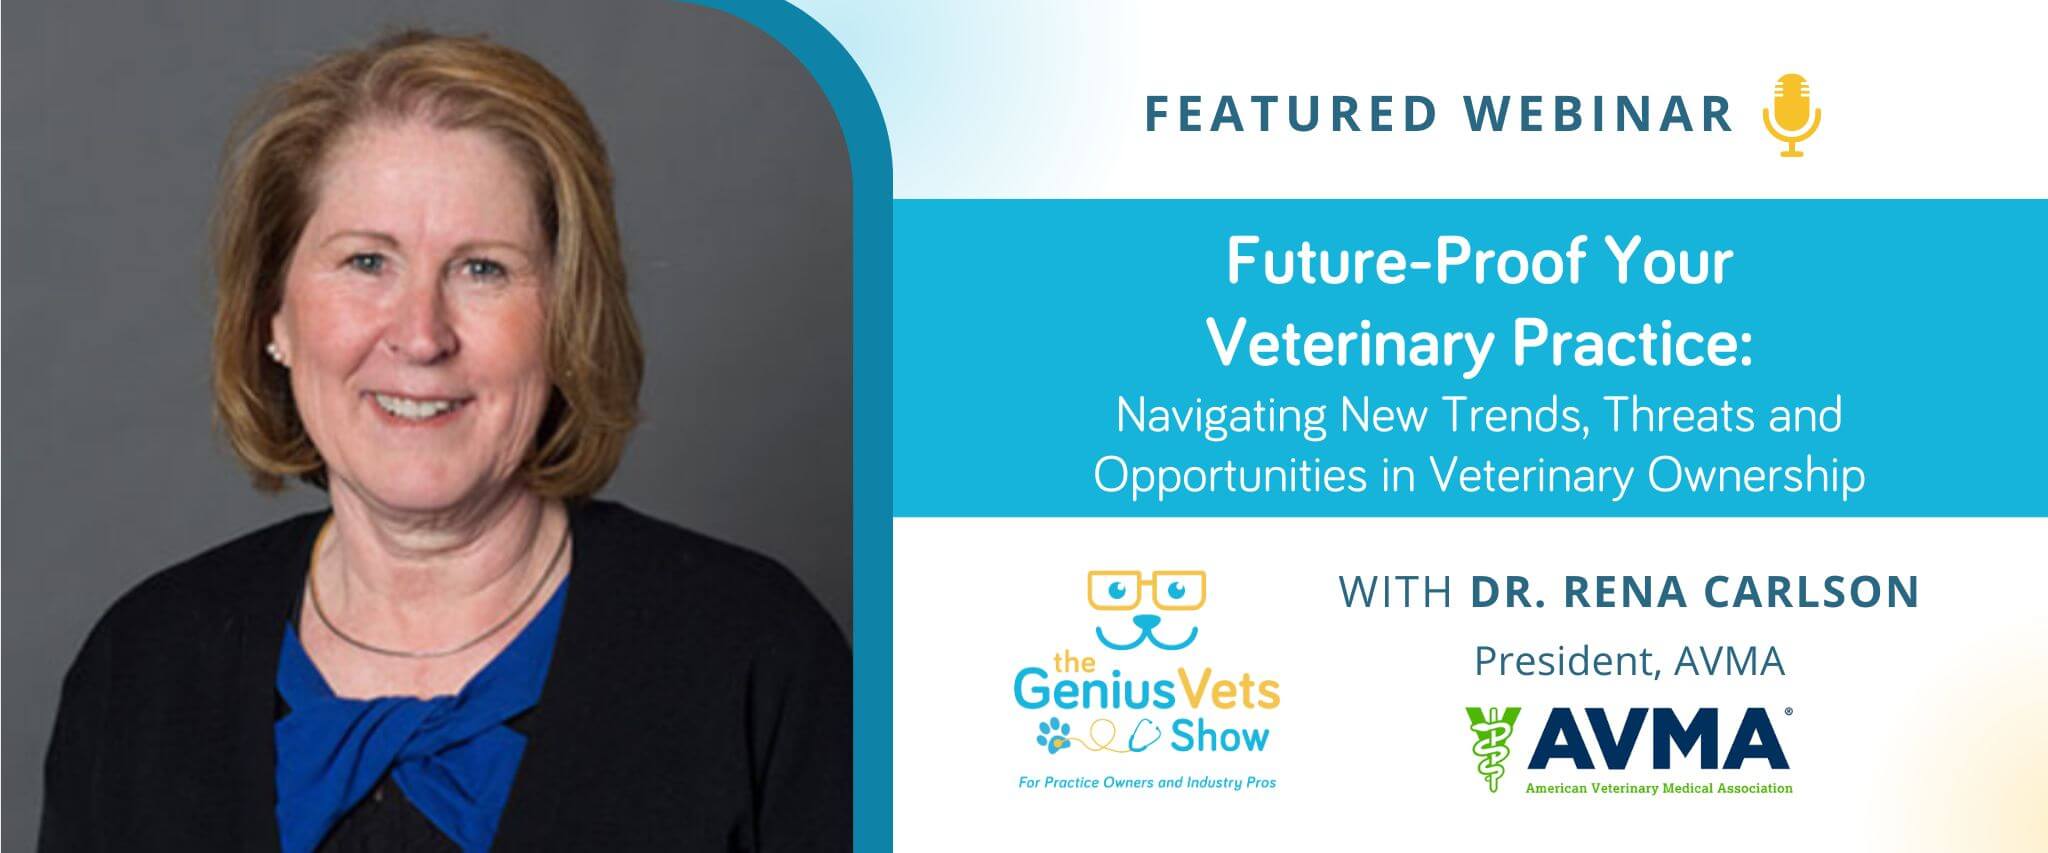 The GeniusVets Show with Dr. Rena Carlson